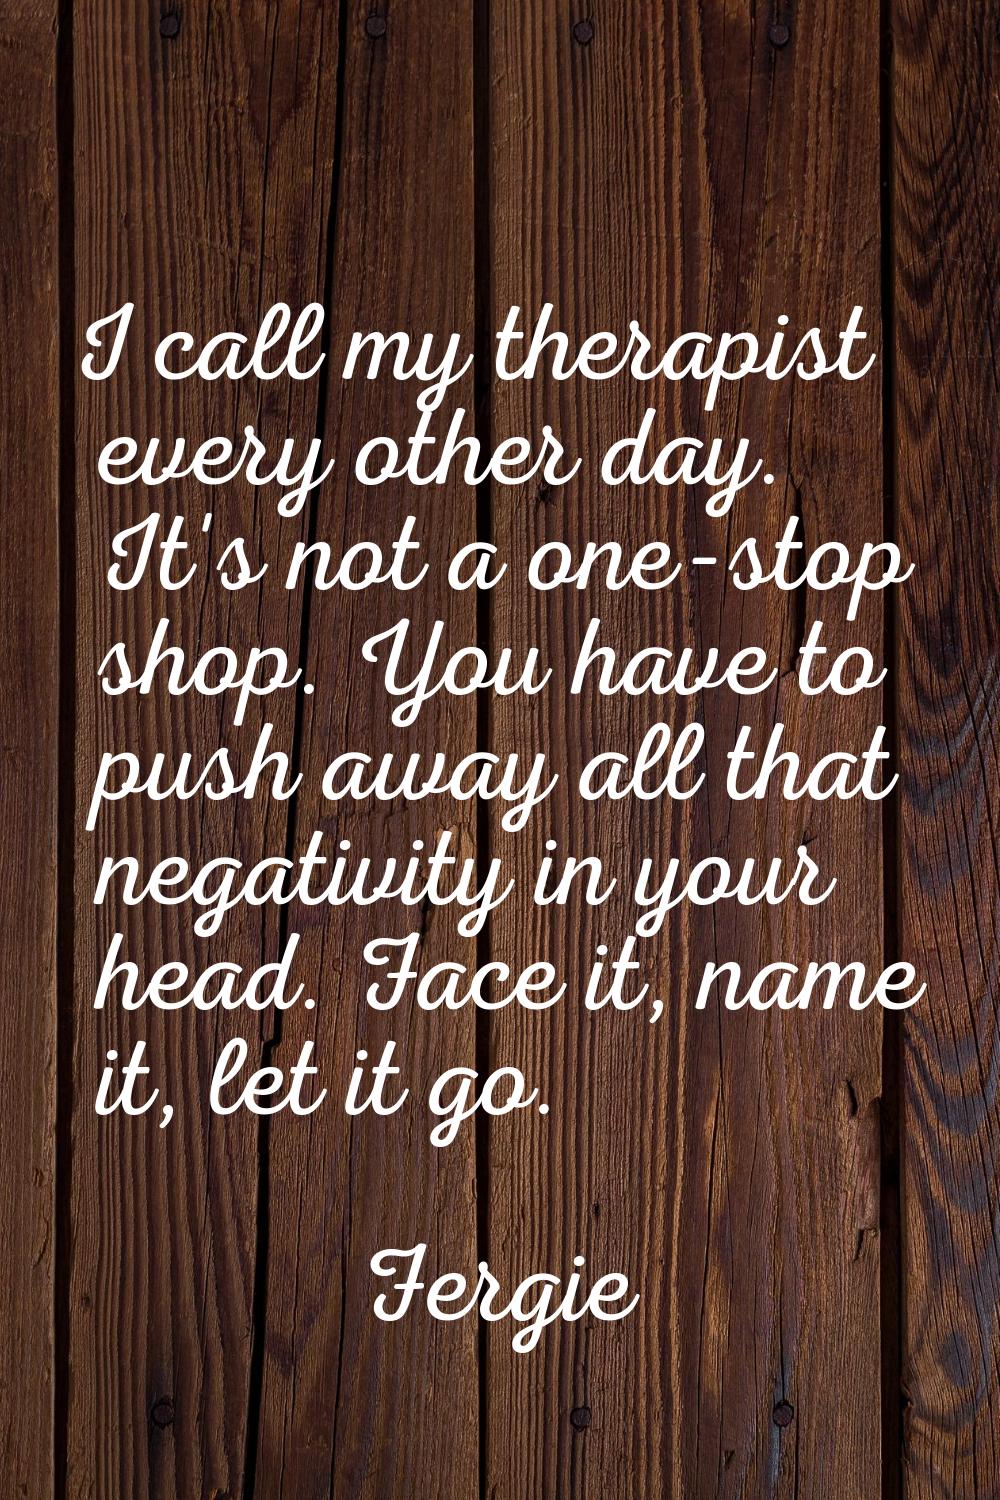 I call my therapist every other day. It's not a one-stop shop. You have to push away all that negat